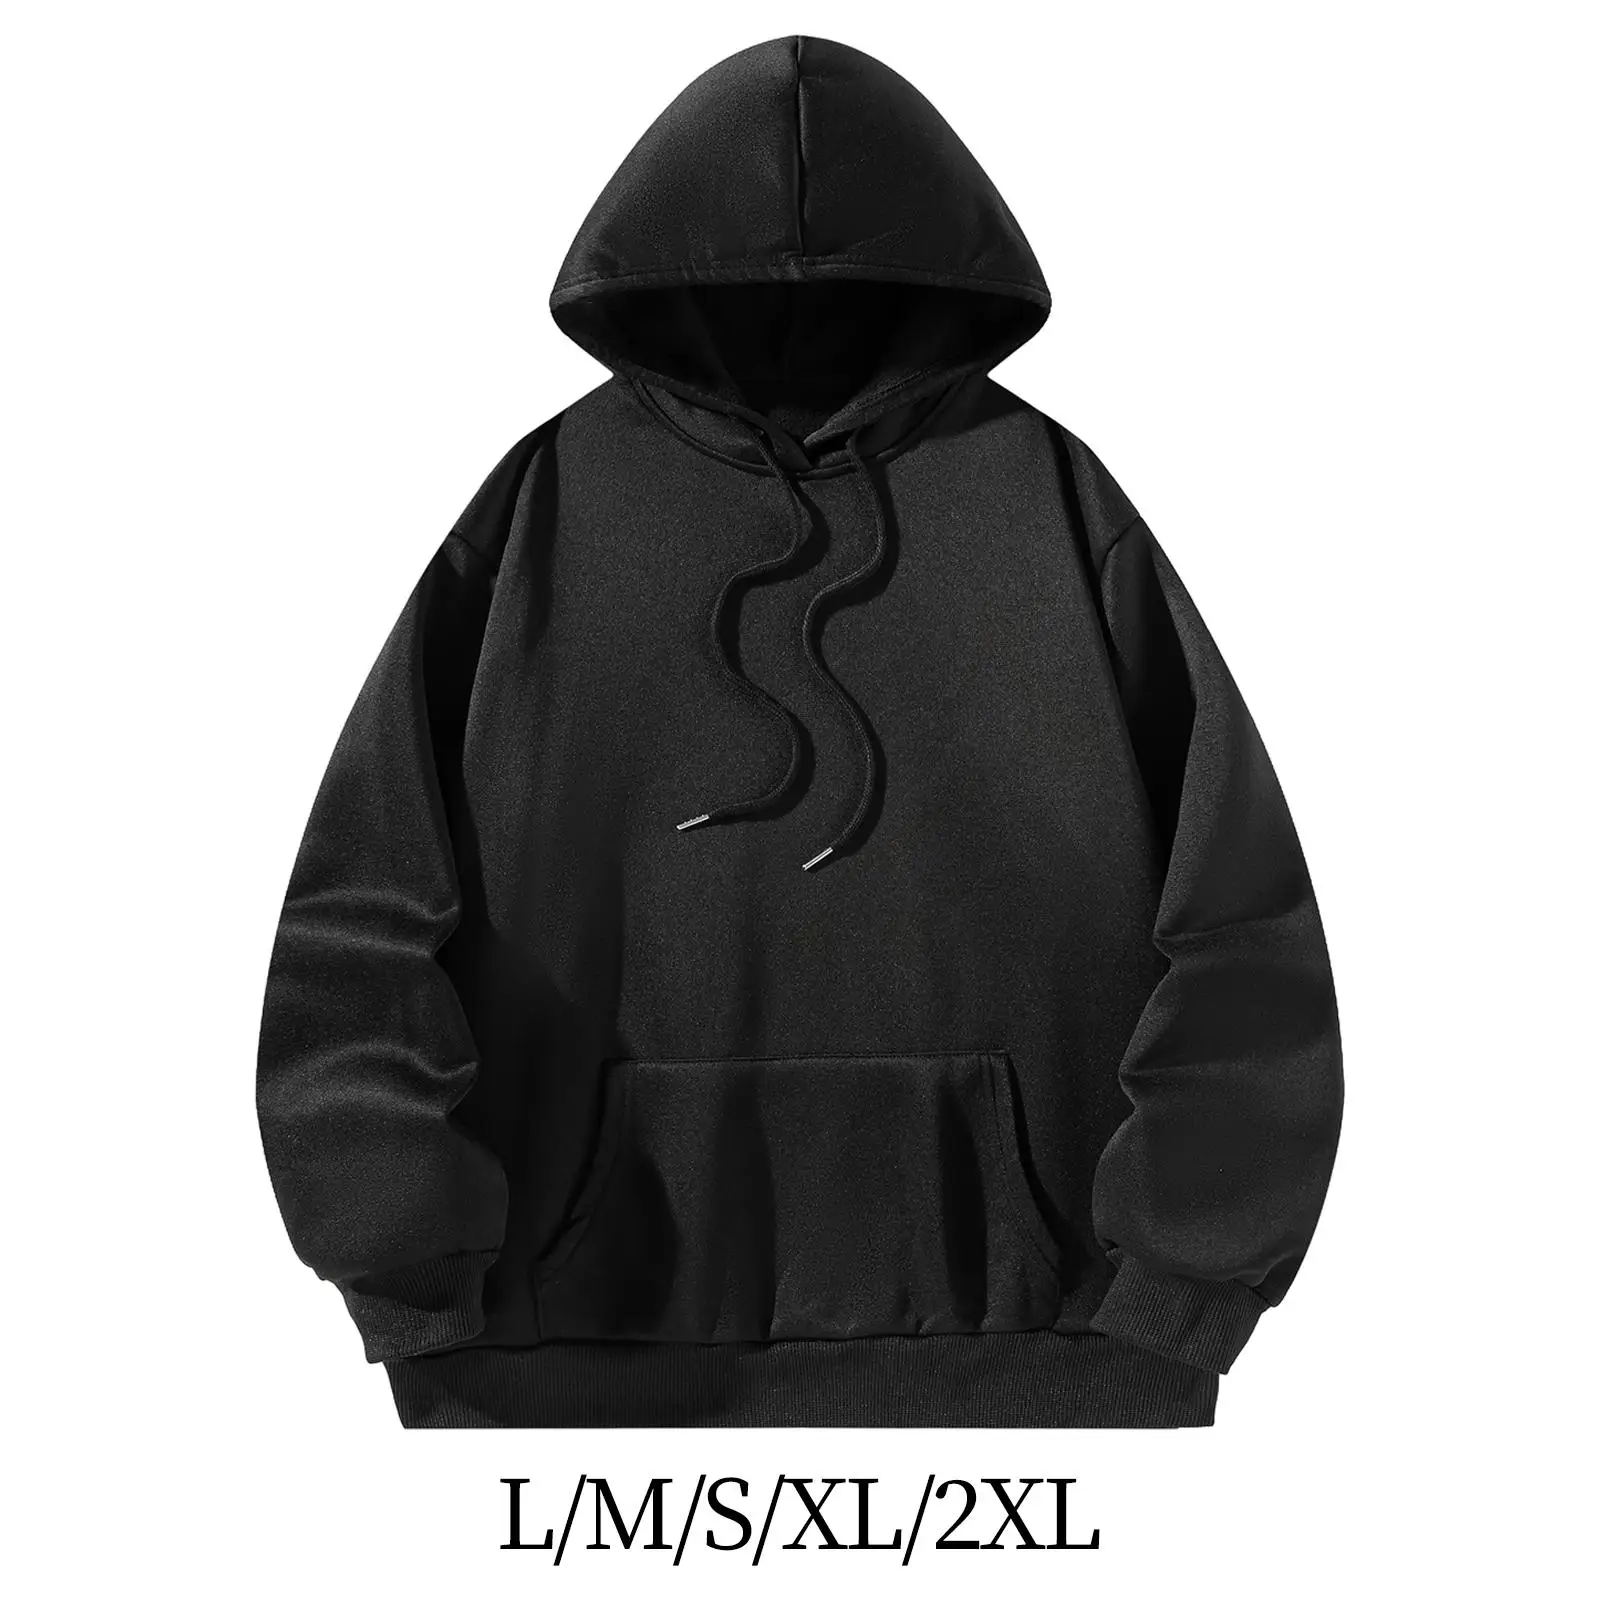 Womens Hoodie Sweatshirt Printed Letter Gift Comfortable Drawstring Pullover Hoodie for Walking Autumn Street Backpacking Sports